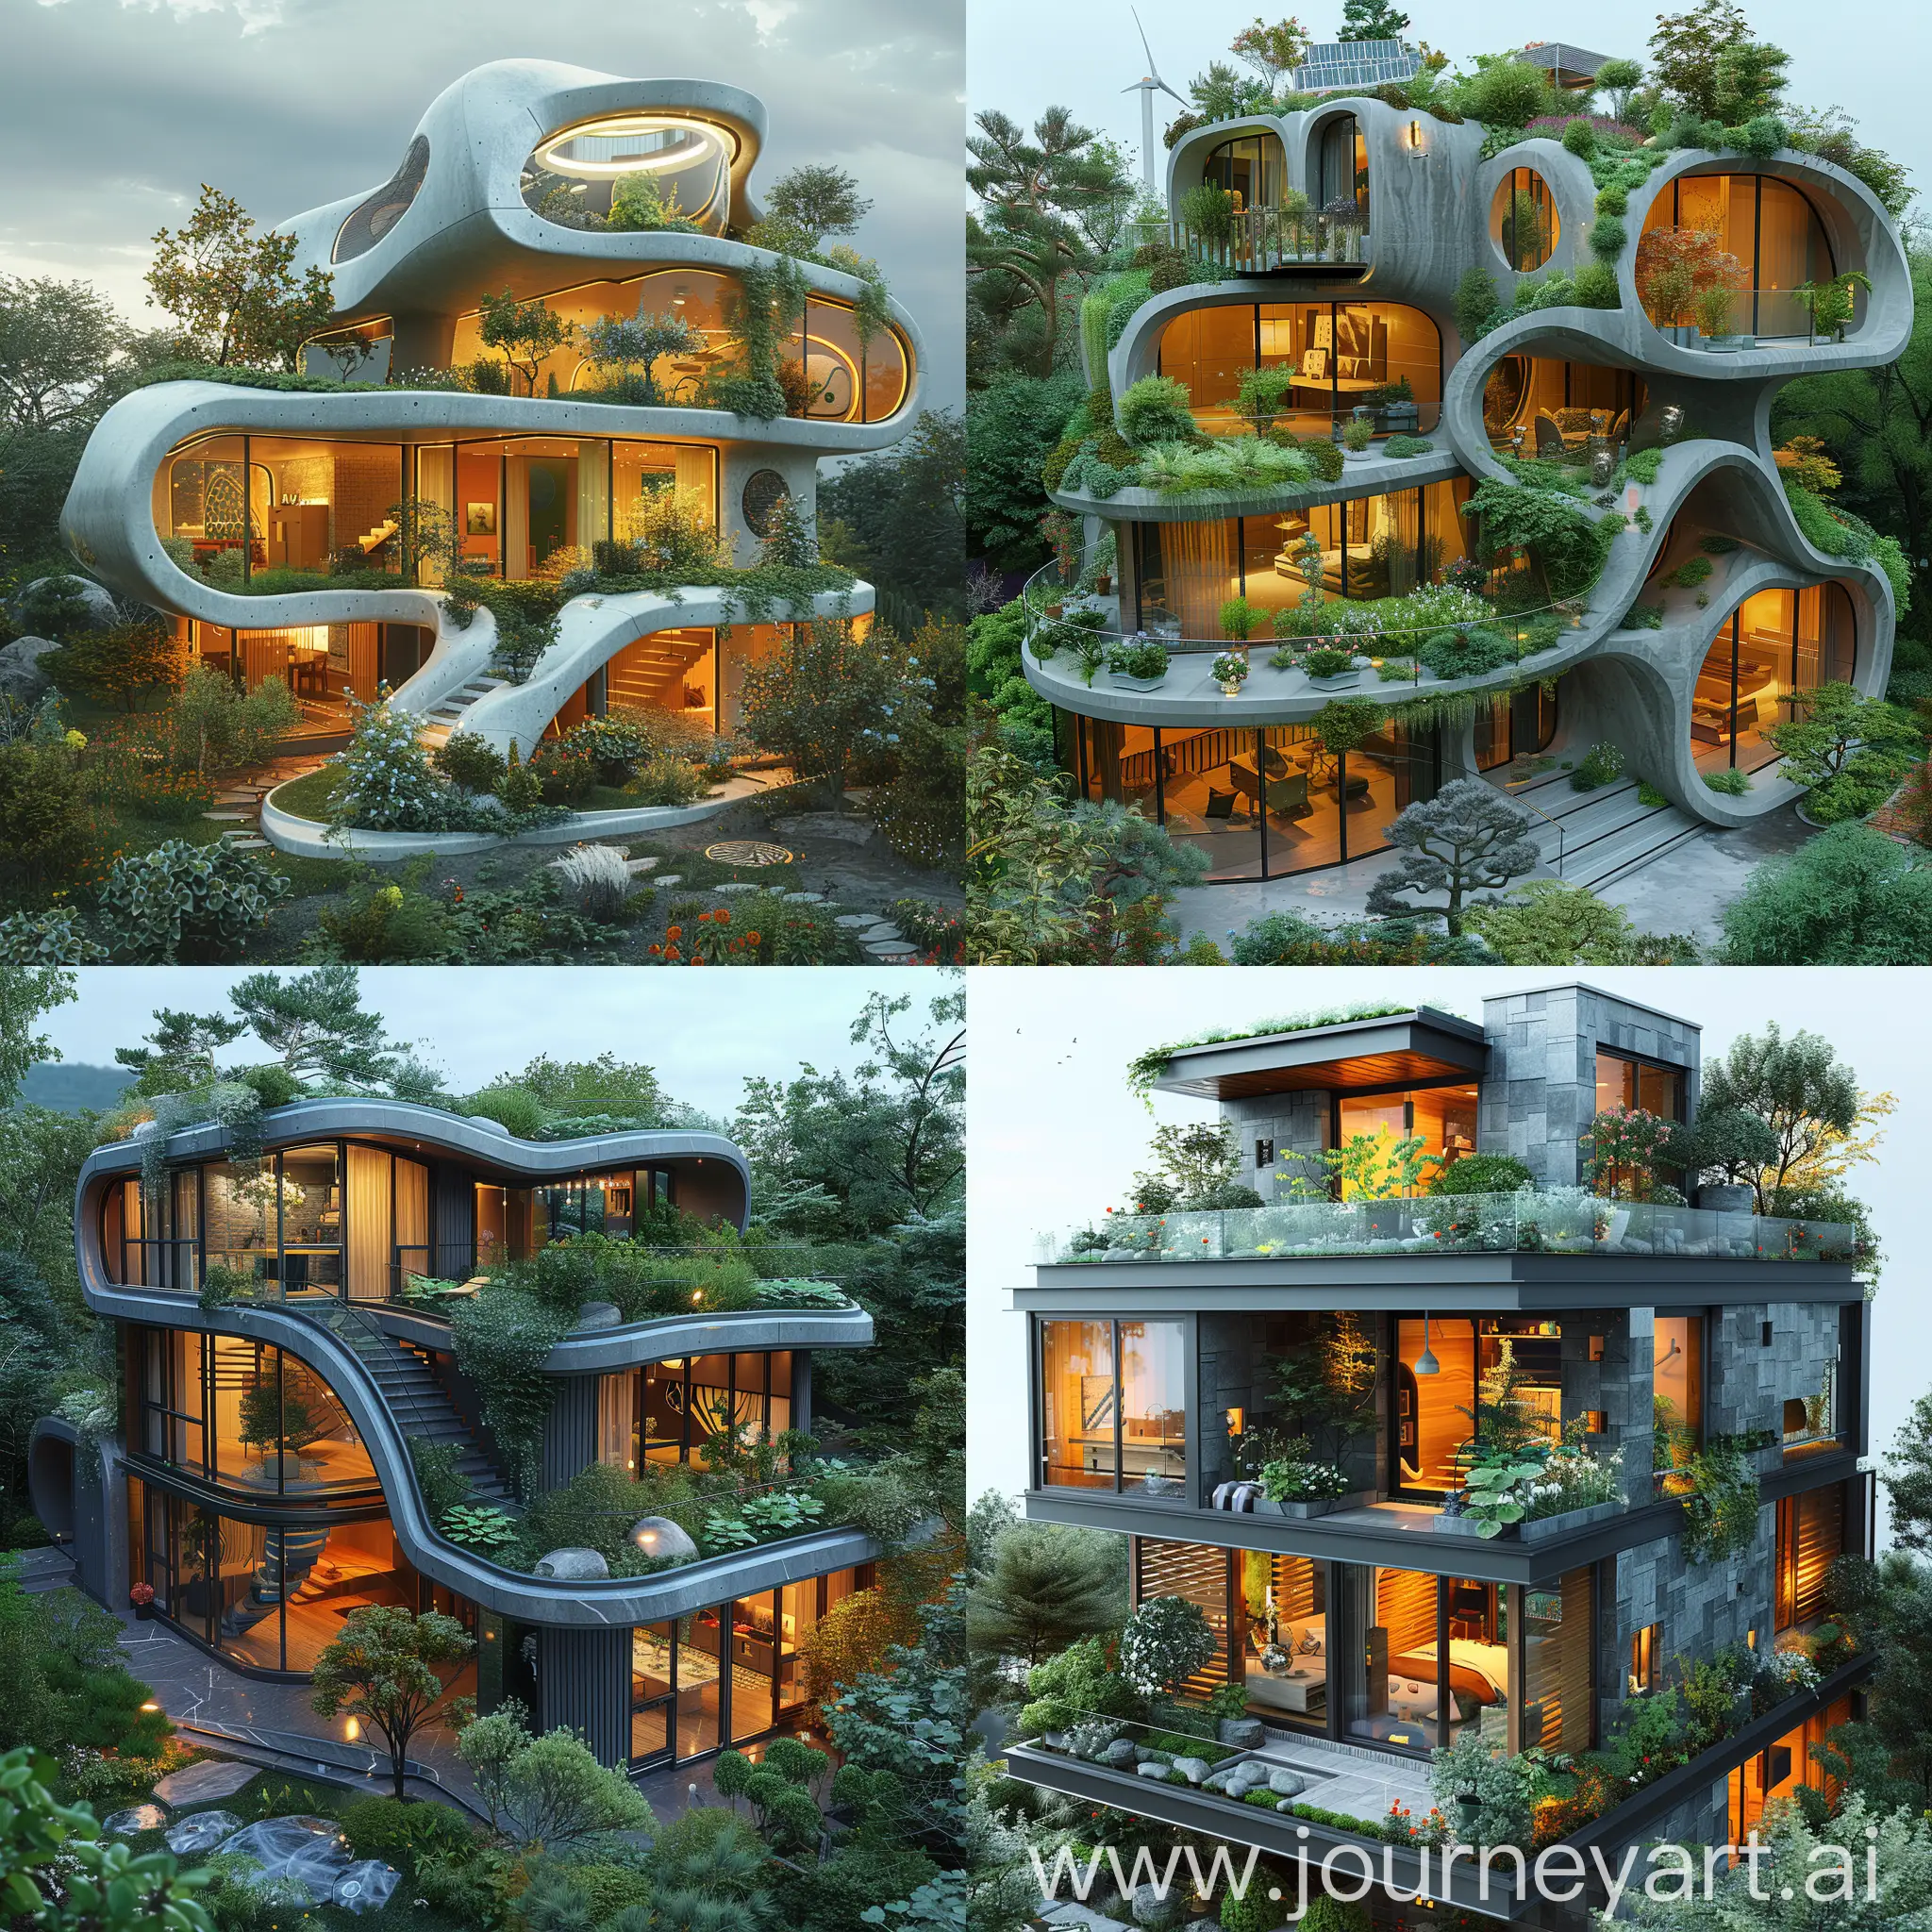 Futuristic house, Solar Panels, Green Roof, Rainwater Harvesting System, Greywater Recycling, Energy-Efficient Appliances, Passive Ventilation, Passive Ventilation, Recycled Materials, Vertical Gardens, Composting System, Smart Home Automation, Biometric Security, Augmented Reality (AR) Integration, Voice-Activated Assistants, Virtual Reality (VR) Room, Smart Windows, Automated Parking System, Hydroponic Indoor Farming, Integrated Energy Management System, Wind Turbines, Self-Cleaning Surfaces, Smart Windows with Nanoparticles, Nanosensors for Air Quality, Nano-Enhanced Insulation, Nanotech Water Purification System, Nanotech Energy Storage, Nanotech Antimicrobial Coatings, Nanotech Smart Fabrics, Nanotech Structural Materials, Nanorobots for Maintenance, octane render --stylize 1000